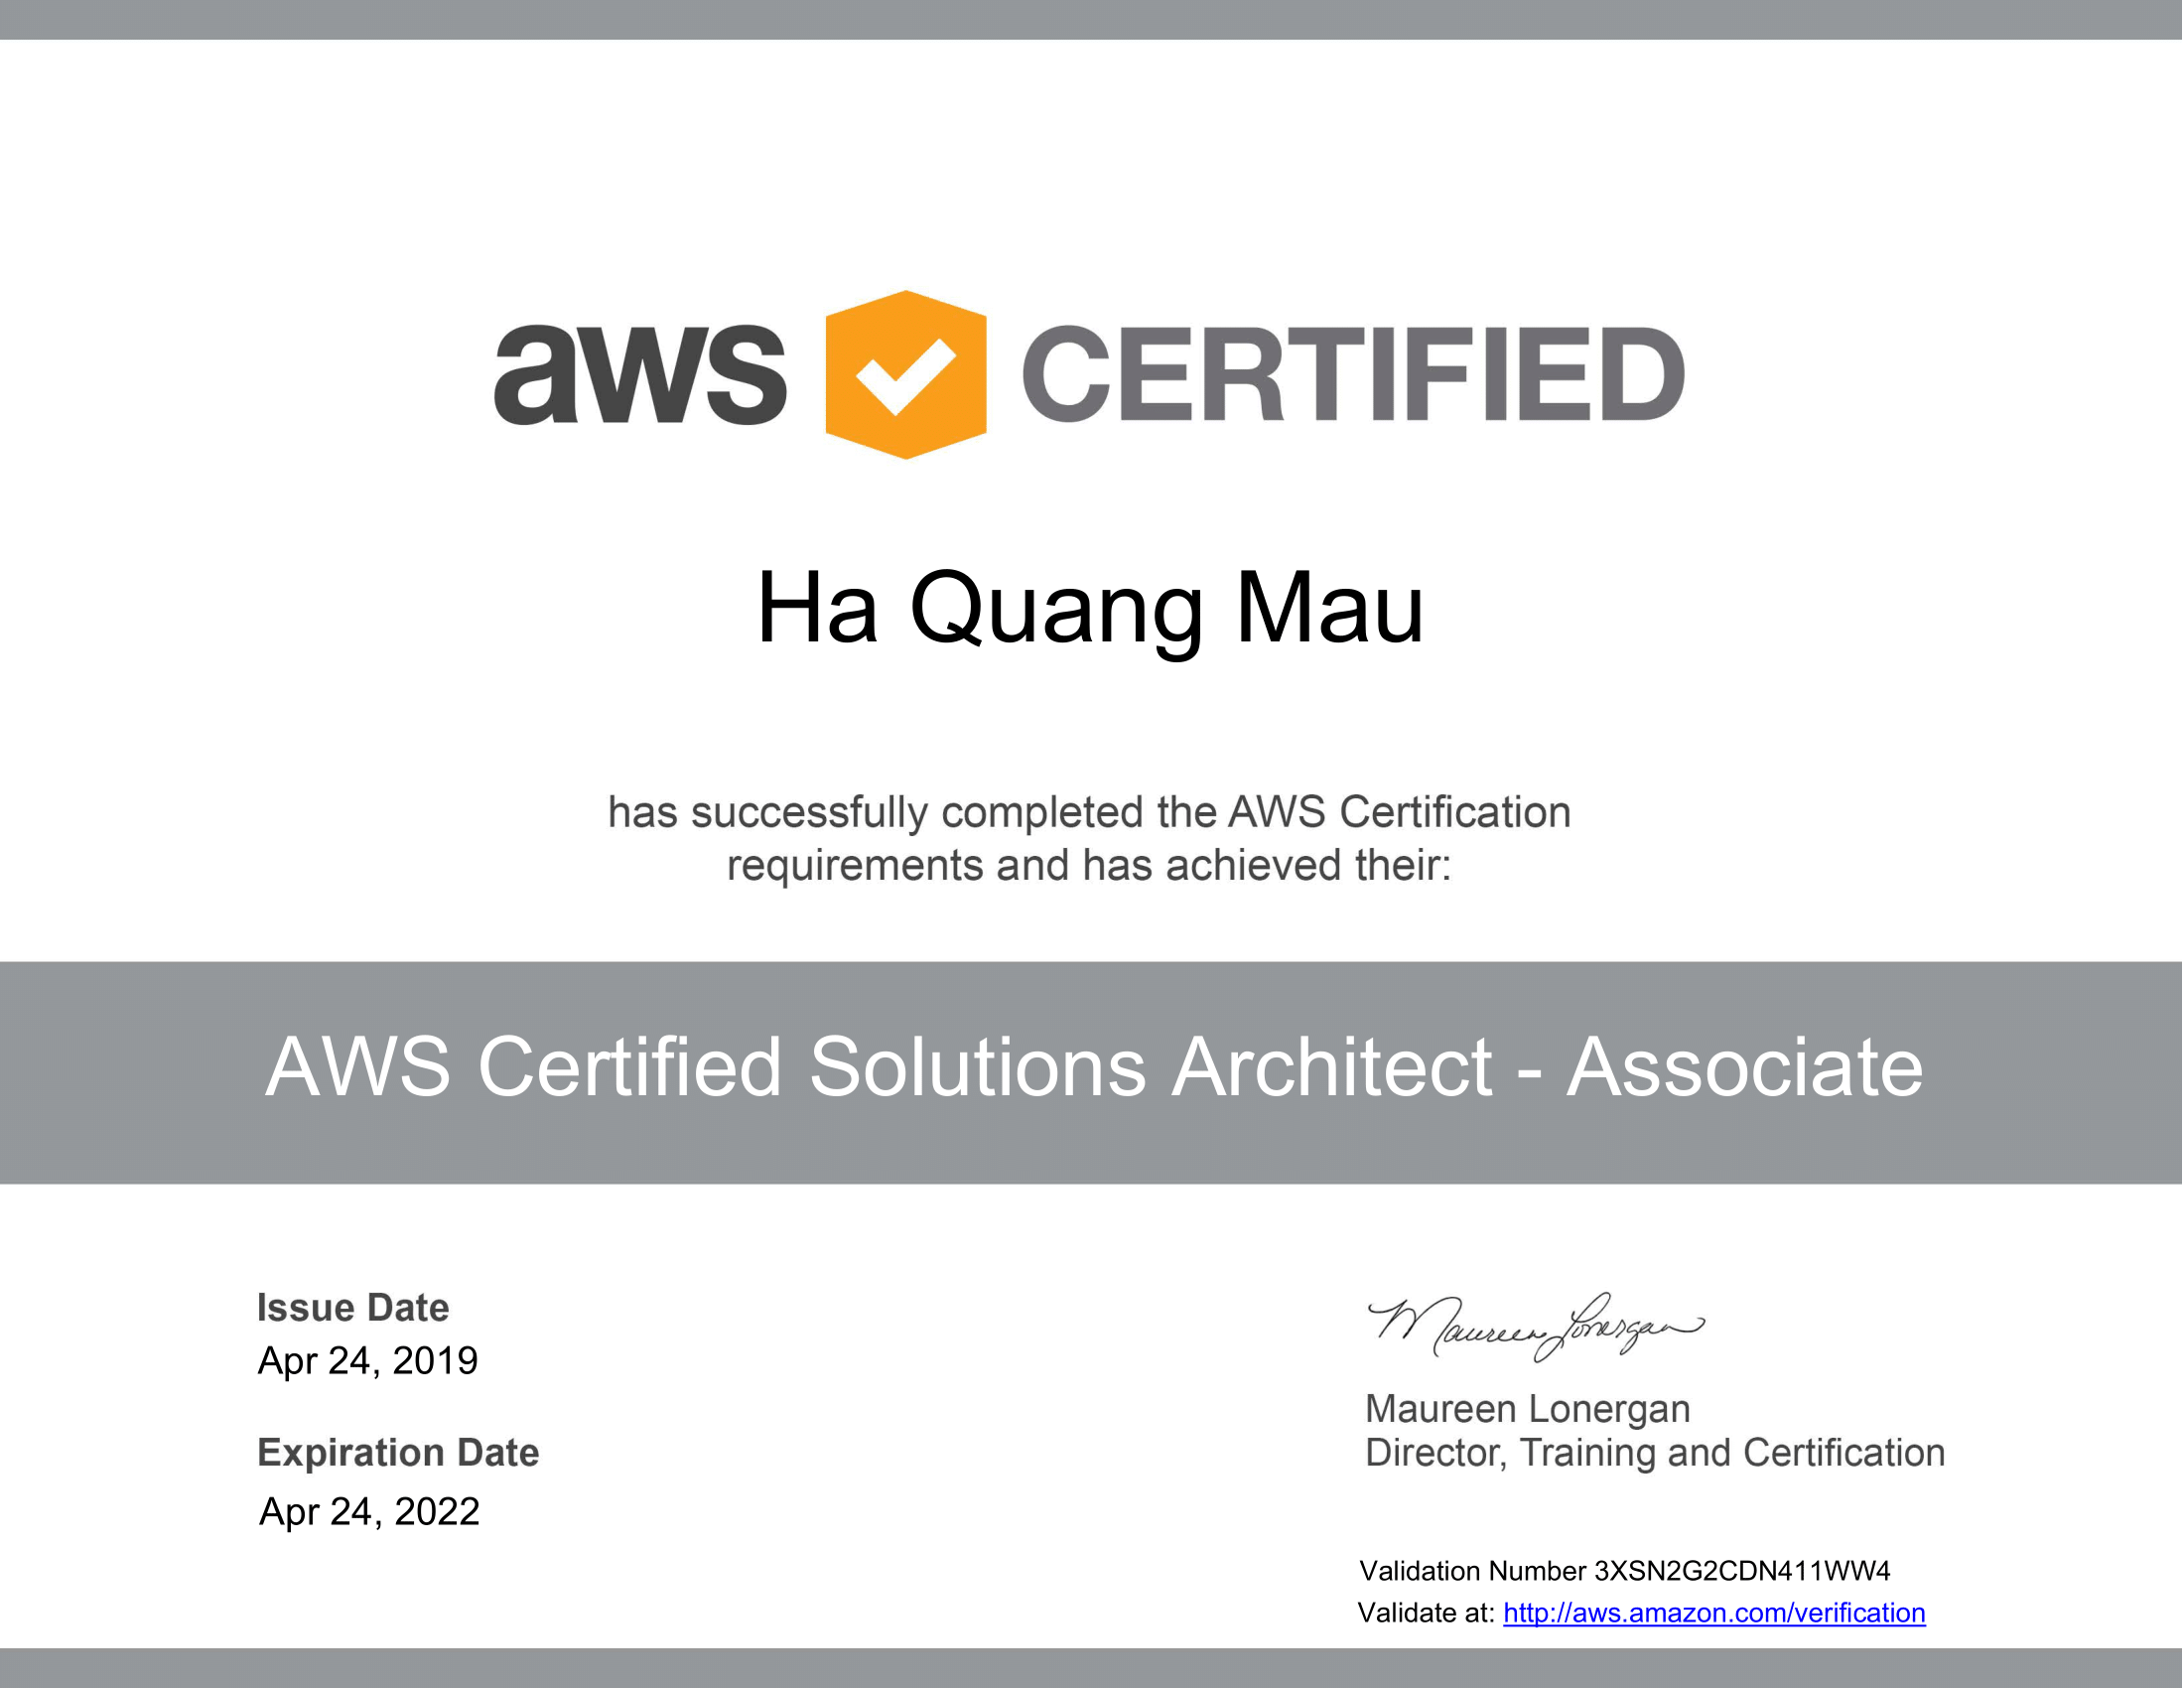 Kinh nghiệm thi chứng chỉ AWS Certified Solutions Architect - Associate